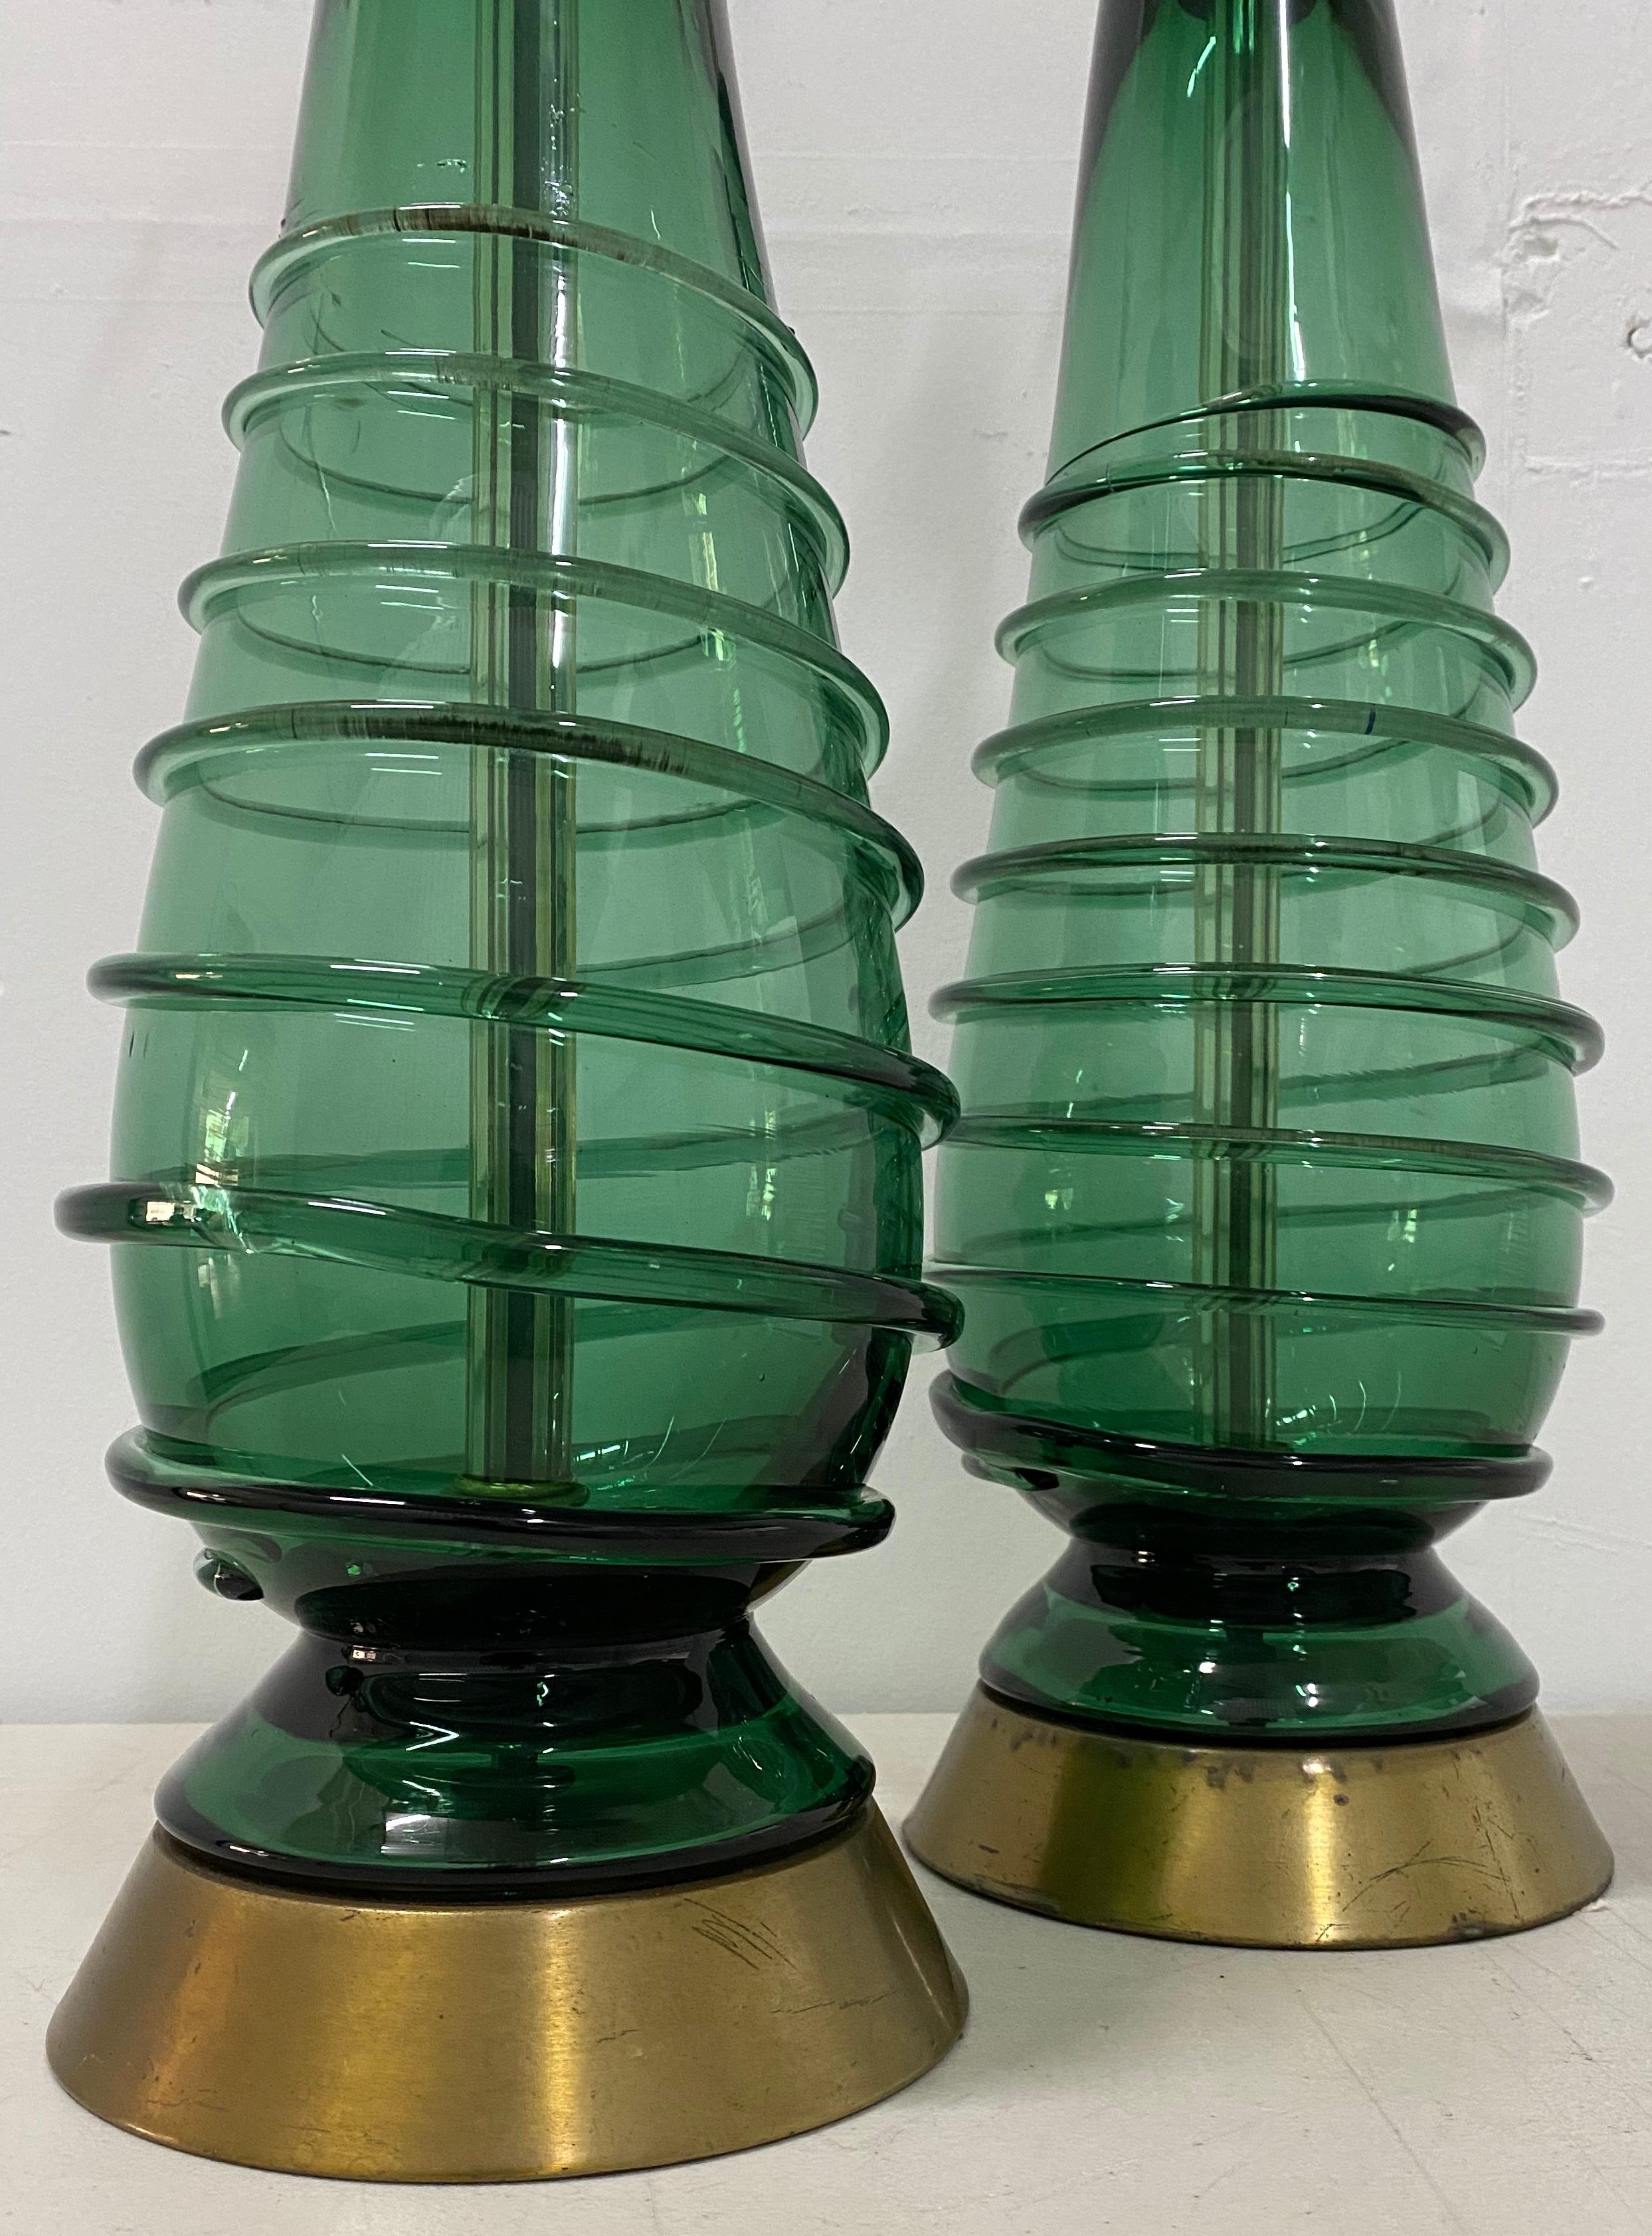 Pair of Mid-Century Modern hand blown green glass swirl table lamps, circa 1960

Outstanding pair of midcentury lamps.

One lamp is slightly larger than the other.

7.25